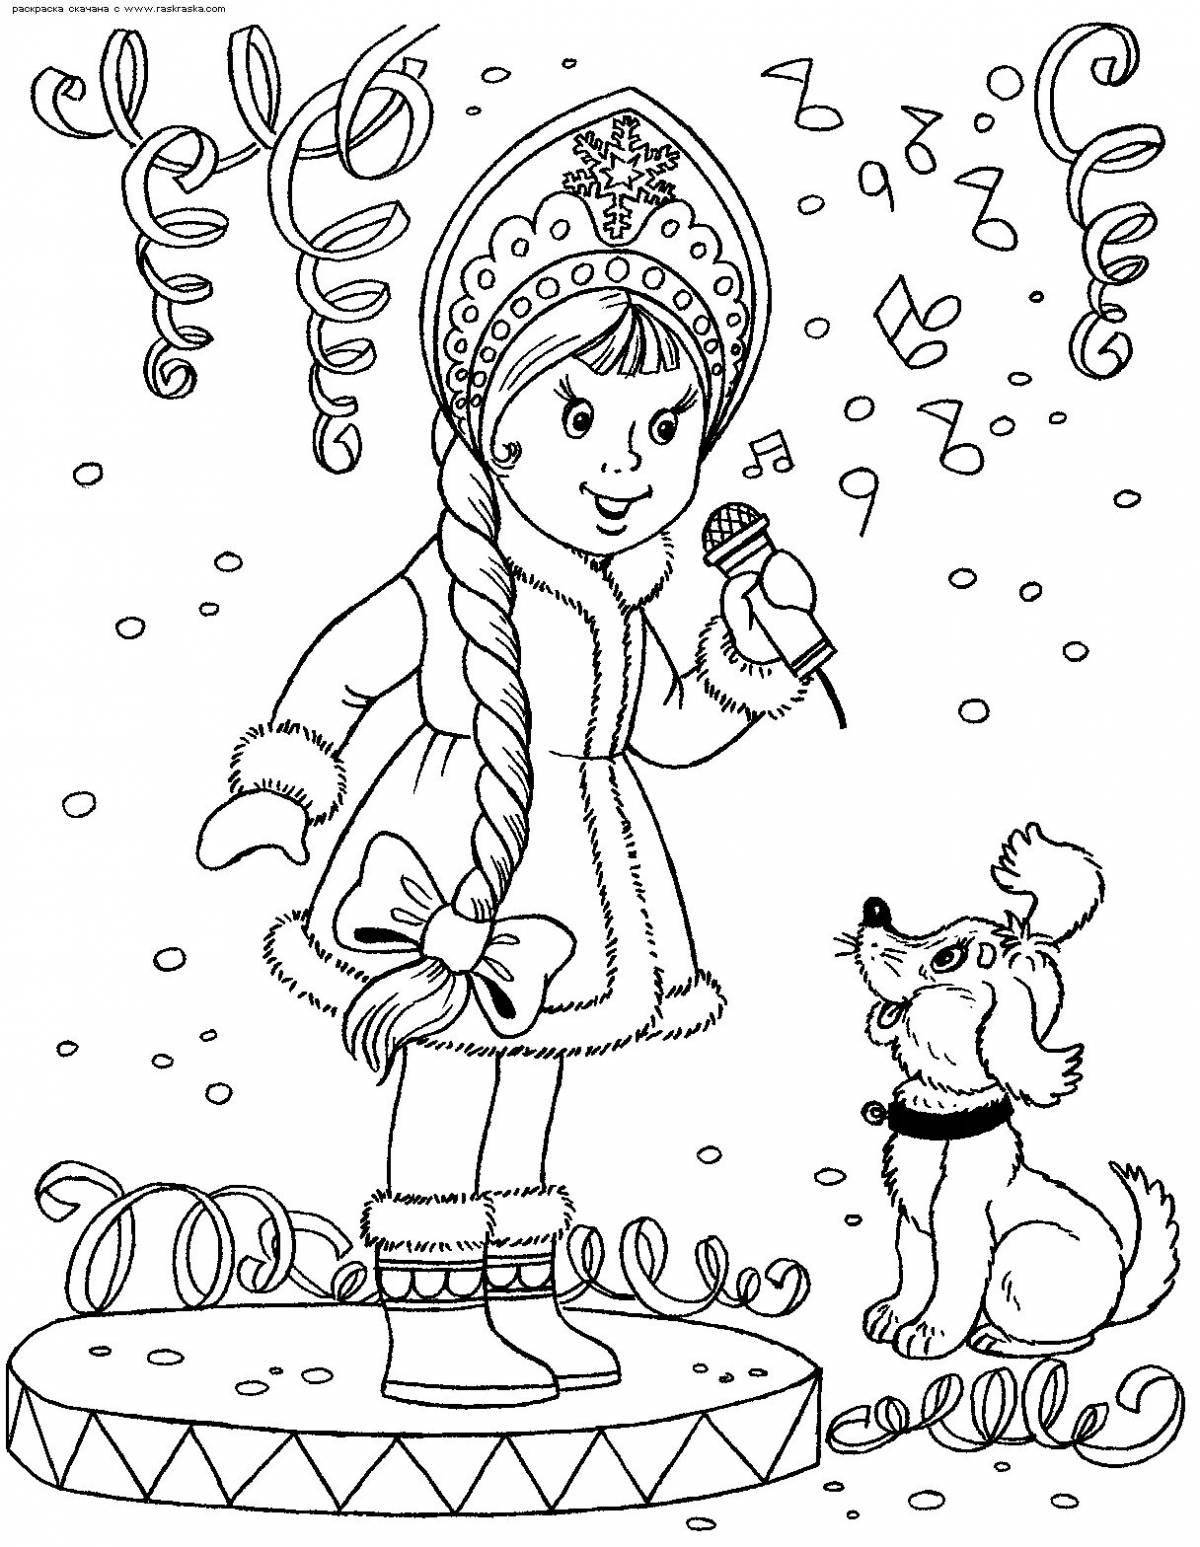 Fabulous Christmas coloring book for girls